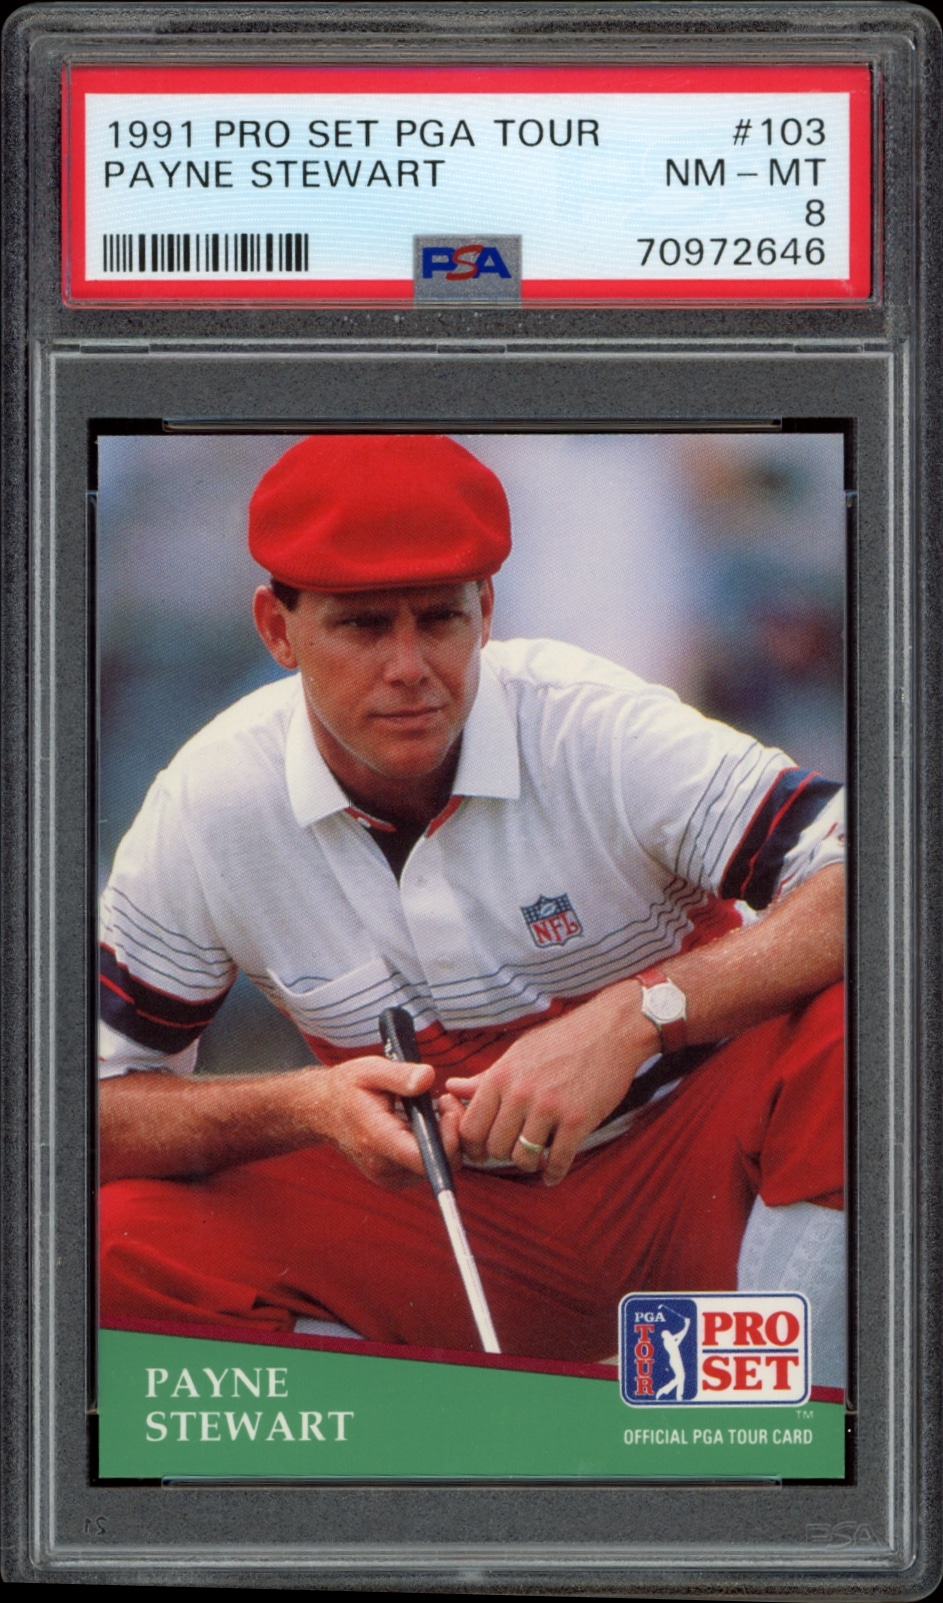 Authenticated 1991 Pro Set PGA Tour card featuring golfer Payne Stewart, graded NM-MT 8 by PSA.